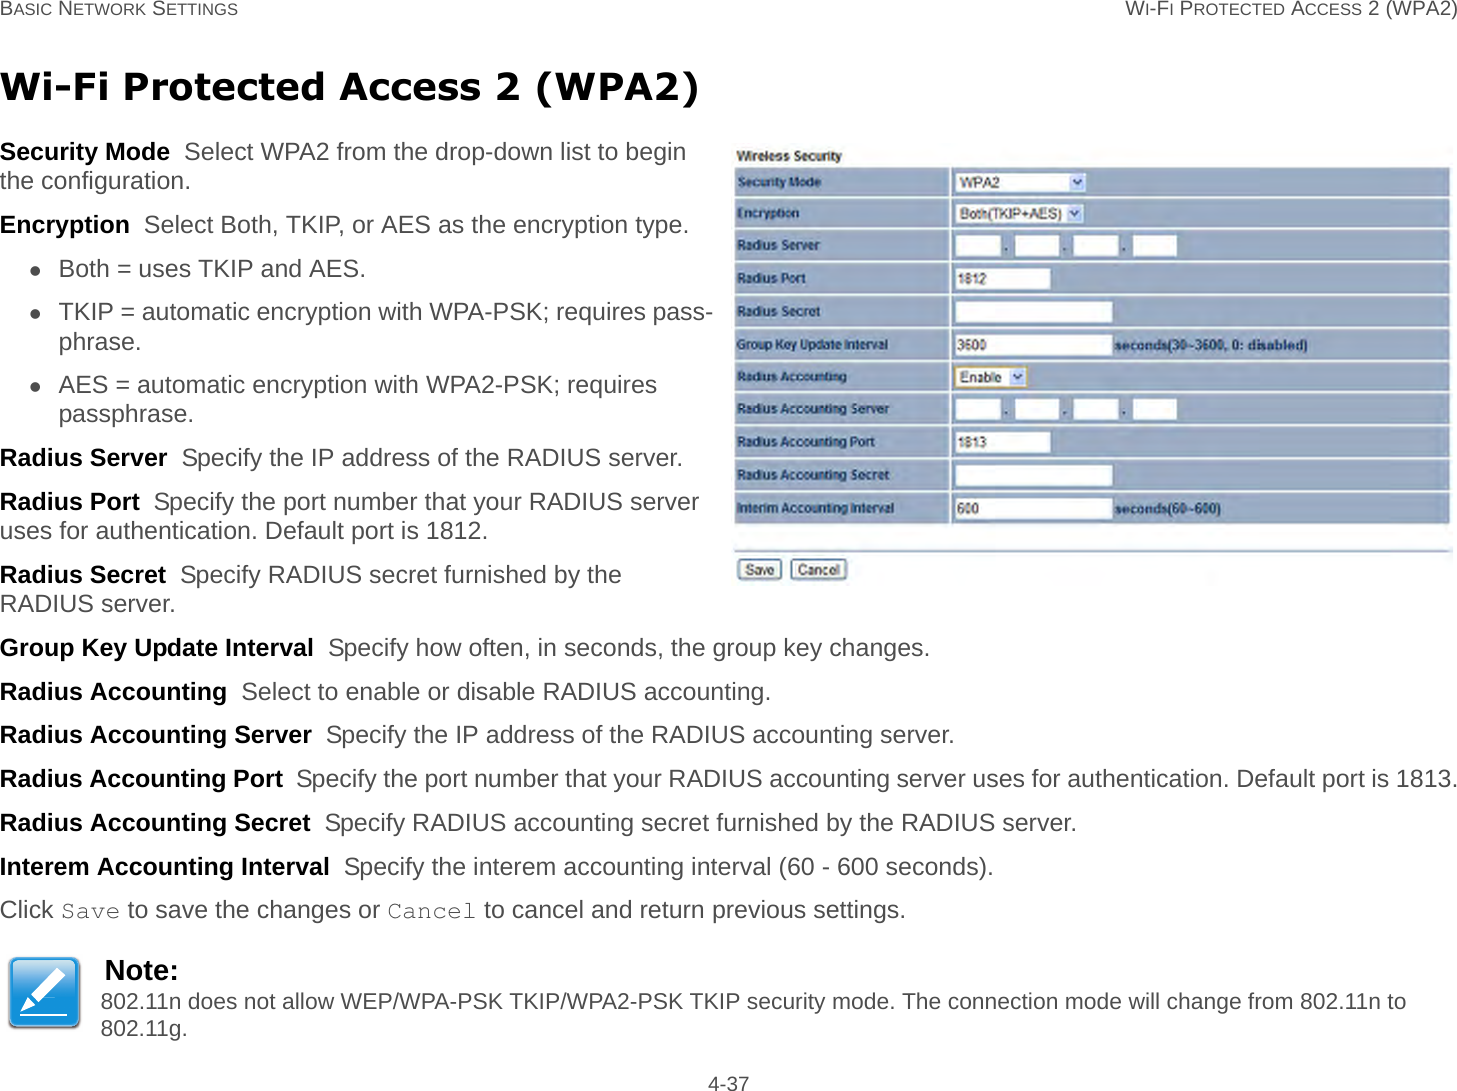 BASIC NETWORK SETTINGS WI-FI PROTECTED ACCESS 2 (WPA2) 4-37Wi-Fi Protected Access 2 (WPA2)Security Mode  Select WPA2 from the drop-down list to begin the configuration.Encryption  Select Both, TKIP, or AES as the encryption type.Both = uses TKIP and AES.TKIP = automatic encryption with WPA-PSK; requires pass-phrase.AES = automatic encryption with WPA2-PSK; requires passphrase.Radius Server  Specify the IP address of the RADIUS server.Radius Port  Specify the port number that your RADIUS server uses for authentication. Default port is 1812.Radius Secret  Specify RADIUS secret furnished by the RADIUS server.Group Key Update Interval  Specify how often, in seconds, the group key changes.Radius Accounting  Select to enable or disable RADIUS accounting.Radius Accounting Server  Specify the IP address of the RADIUS accounting server.Radius Accounting Port  Specify the port number that your RADIUS accounting server uses for authentication. Default port is 1813.Radius Accounting Secret  Specify RADIUS accounting secret furnished by the RADIUS server.Interem Accounting Interval  Specify the interem accounting interval (60 - 600 seconds).Click Save to save the changes or Cancel to cancel and return previous settings.Note:802.11n does not allow WEP/WPA-PSK TKIP/WPA2-PSK TKIP security mode. The connection mode will change from 802.11n to 802.11g.